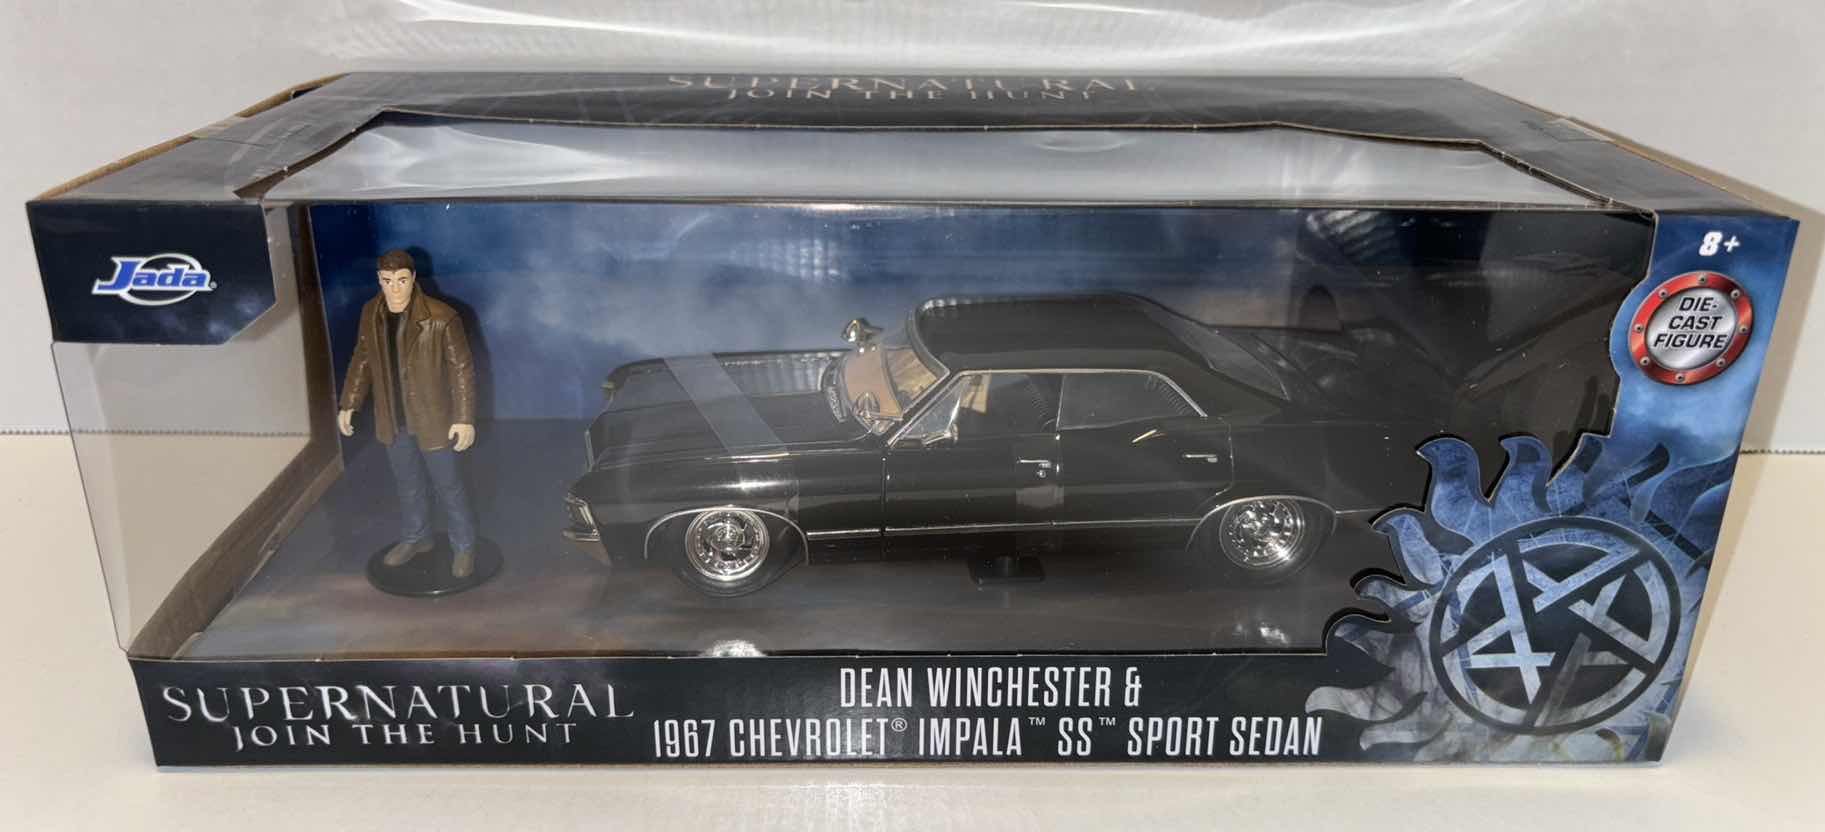 Photo 3 of NEW JADA TOYS HOLLYWOOD RIDES SUPERNATURAL JOIN THE HUNT DIE-CAST VEHICLE & FIGURE 2-PACK, “DEAN WINCHESTER & 1967 CHEVROLET IMPALA SS SPORT SEDAN”